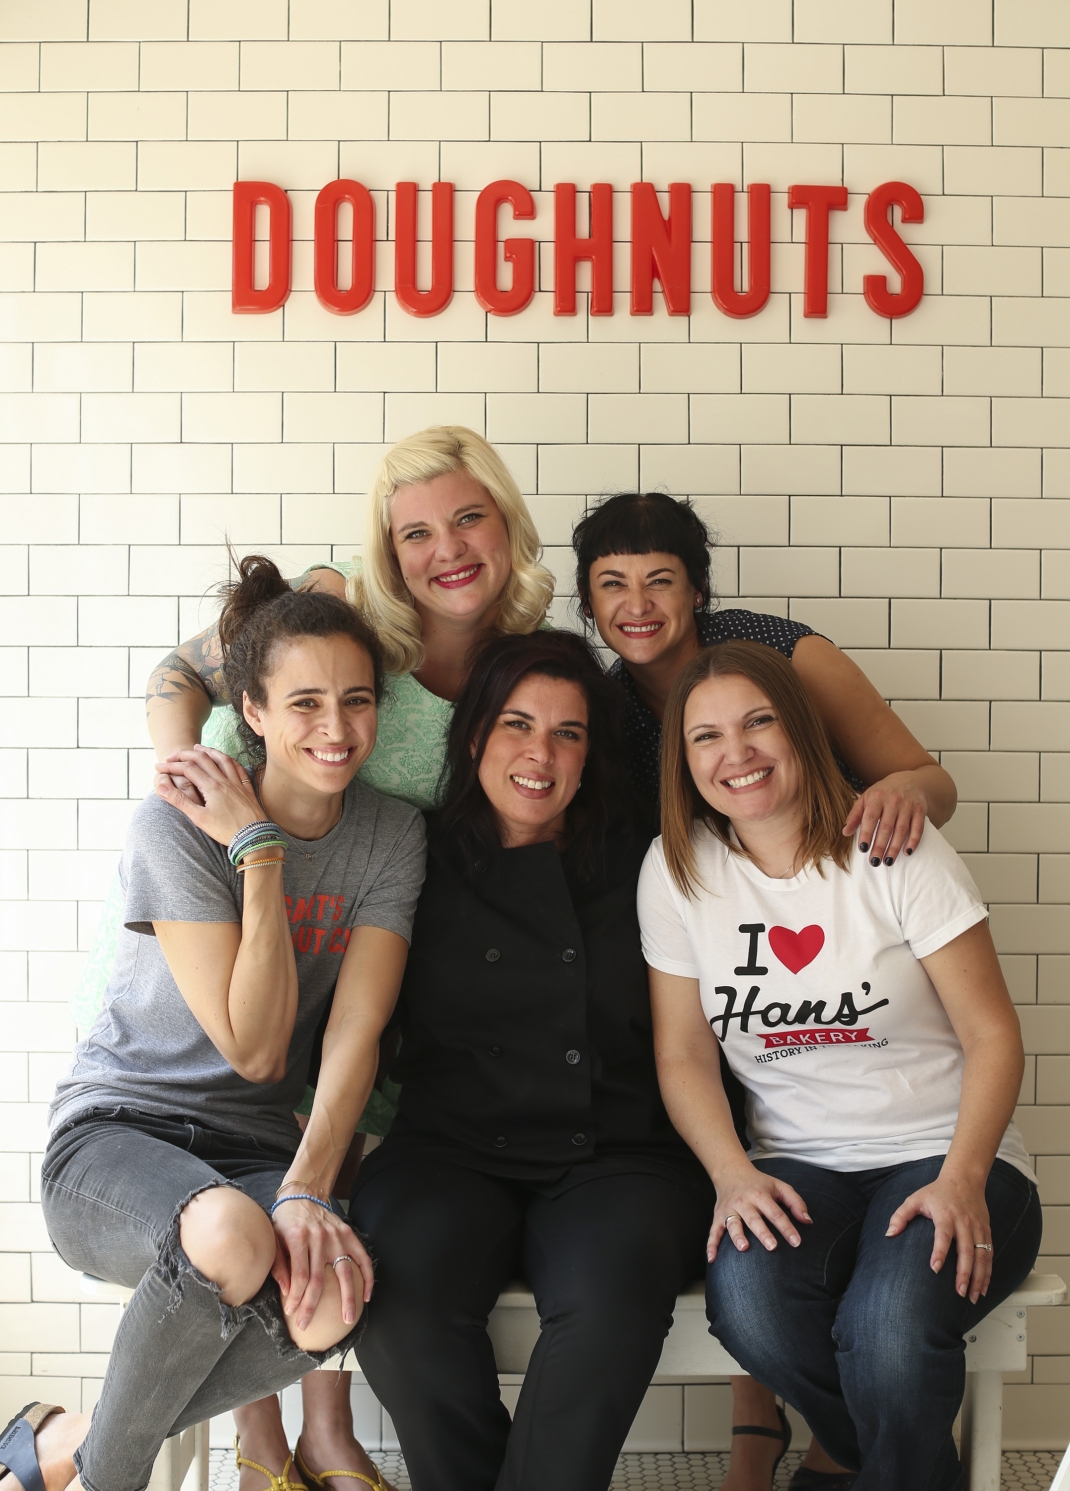 These five women have taken the Twin Cities doughnut scene to new levels. Front row, from left: Anne Rucker of Bogart’s Doughnut Co., Lisa Clark of Mojo Monkey Donuts and Kelly Olsen of Hans’ Bakery. Back row (from left): Teresa Fox and Arwyn Birch of Glam Doll Donuts.